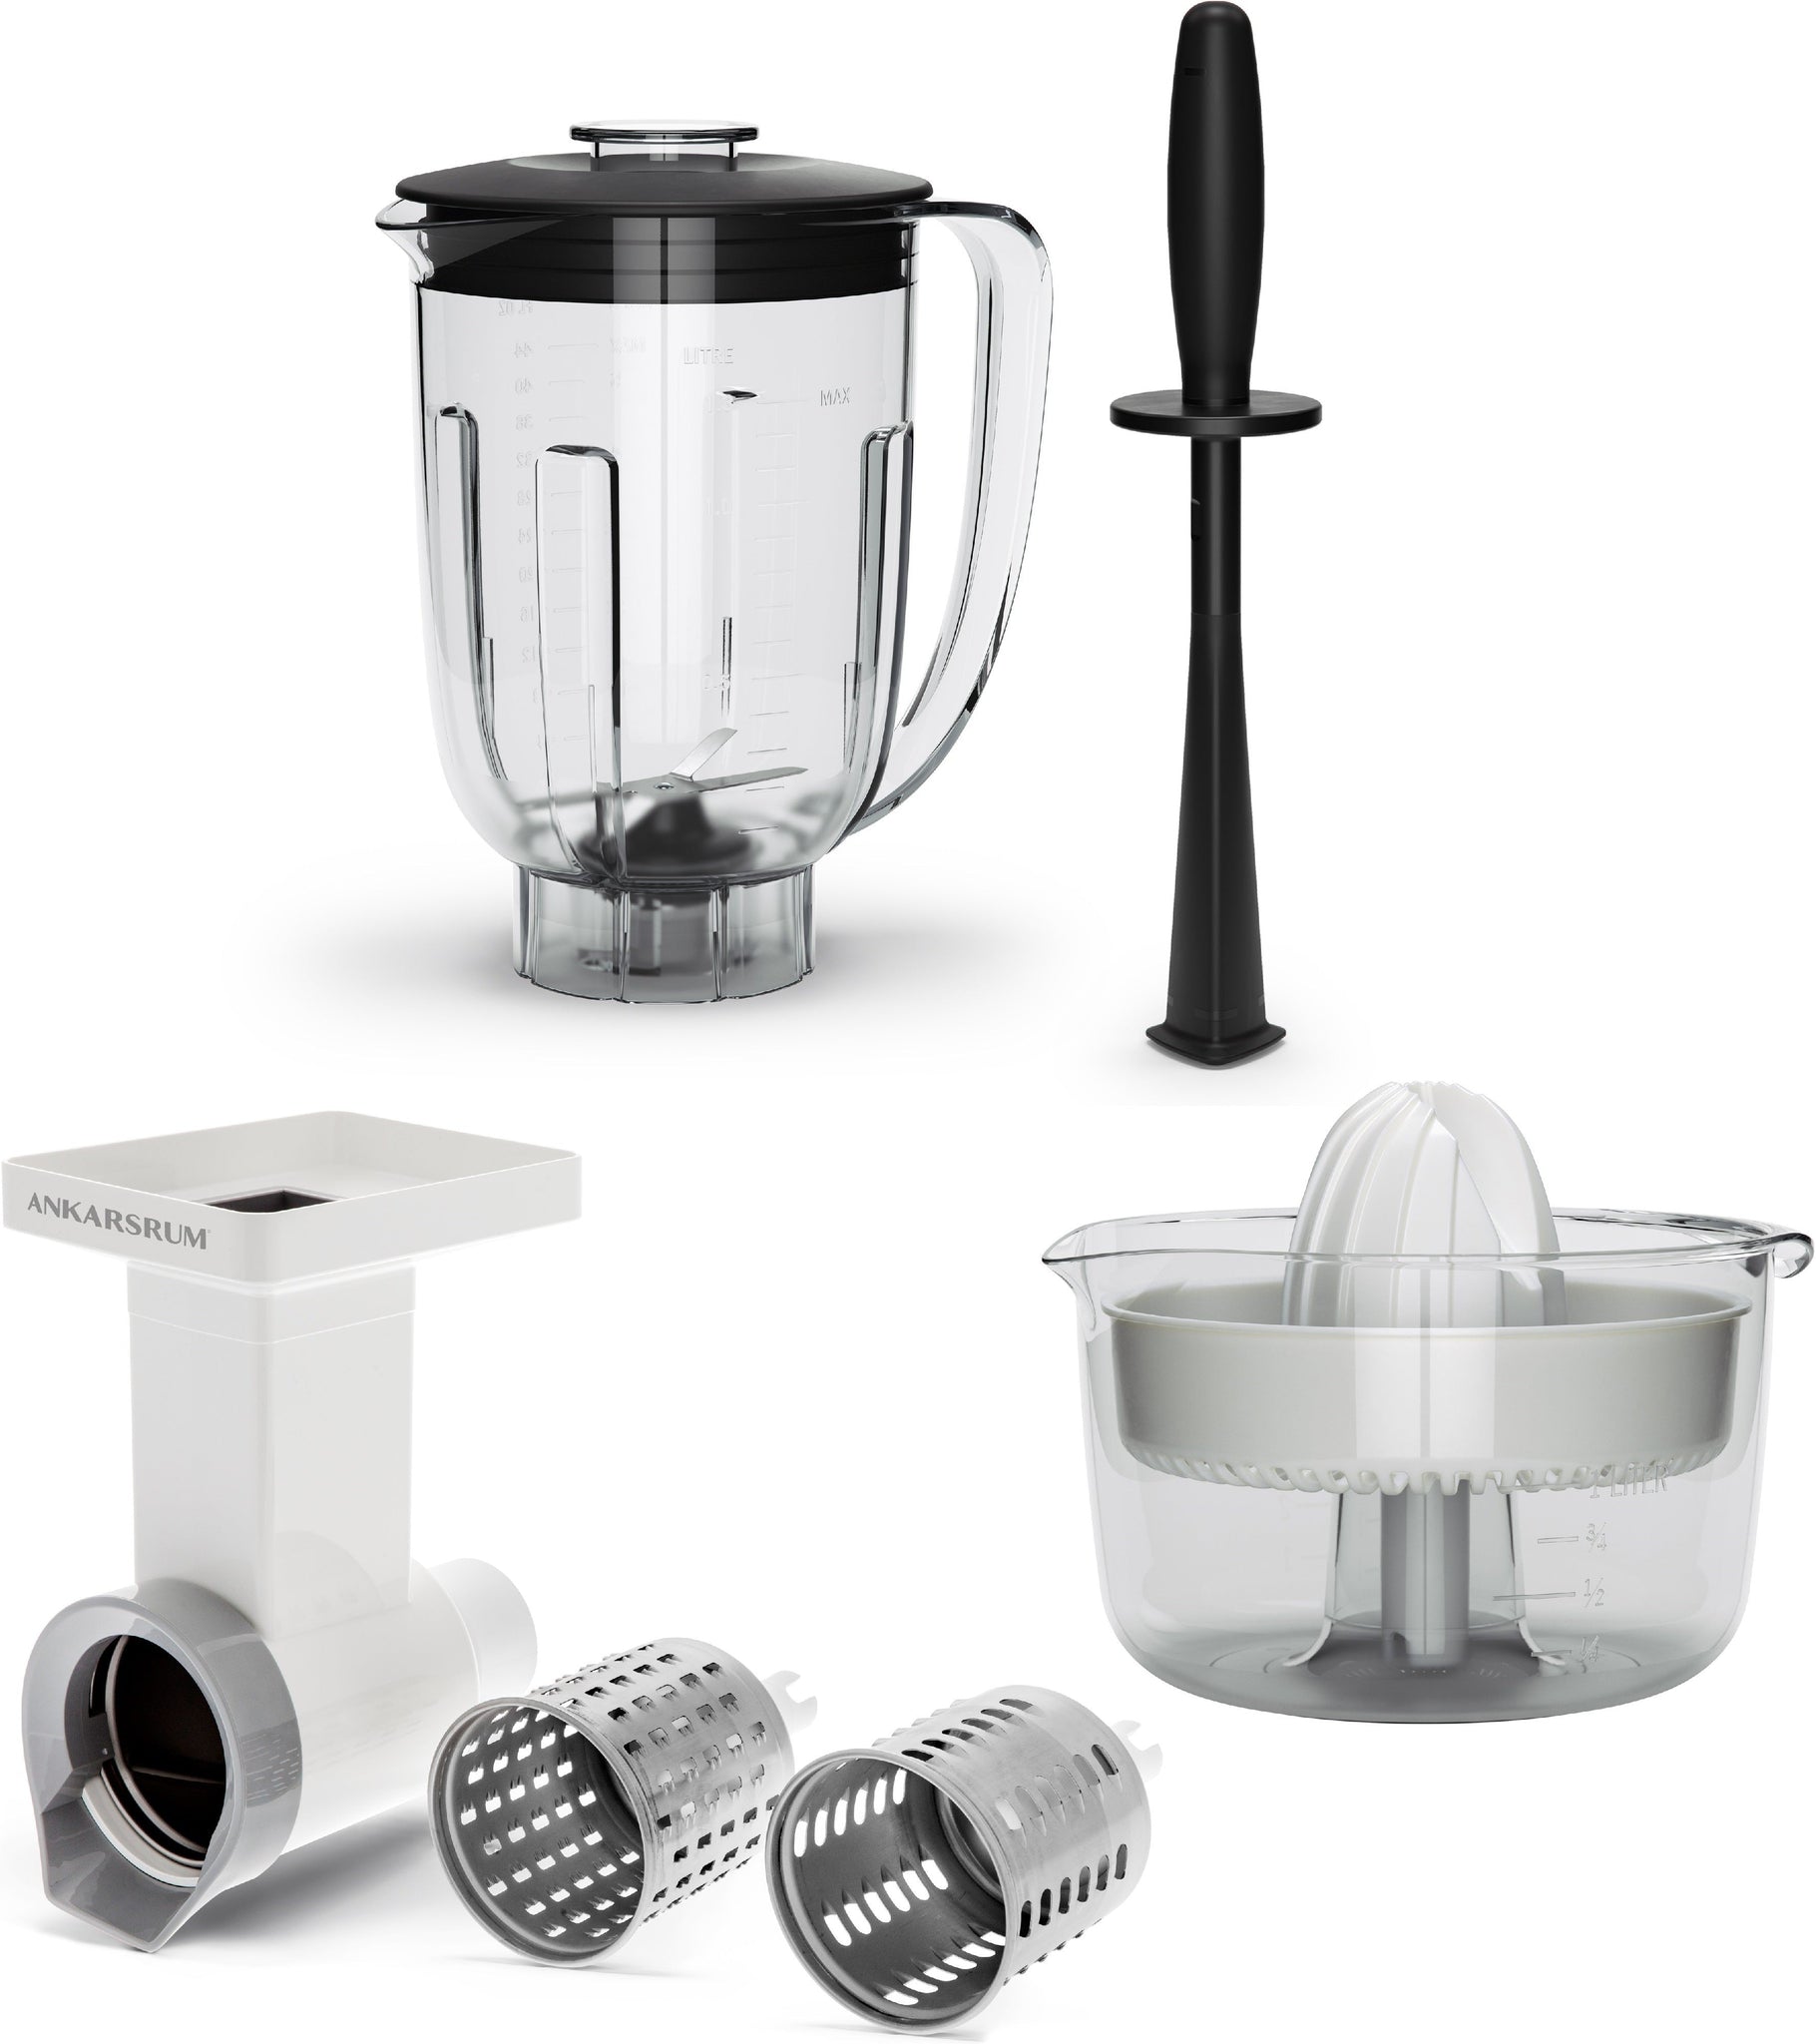 Ankarsrum - Assistent Original Go Green Package For Stand Mixer - 920900070